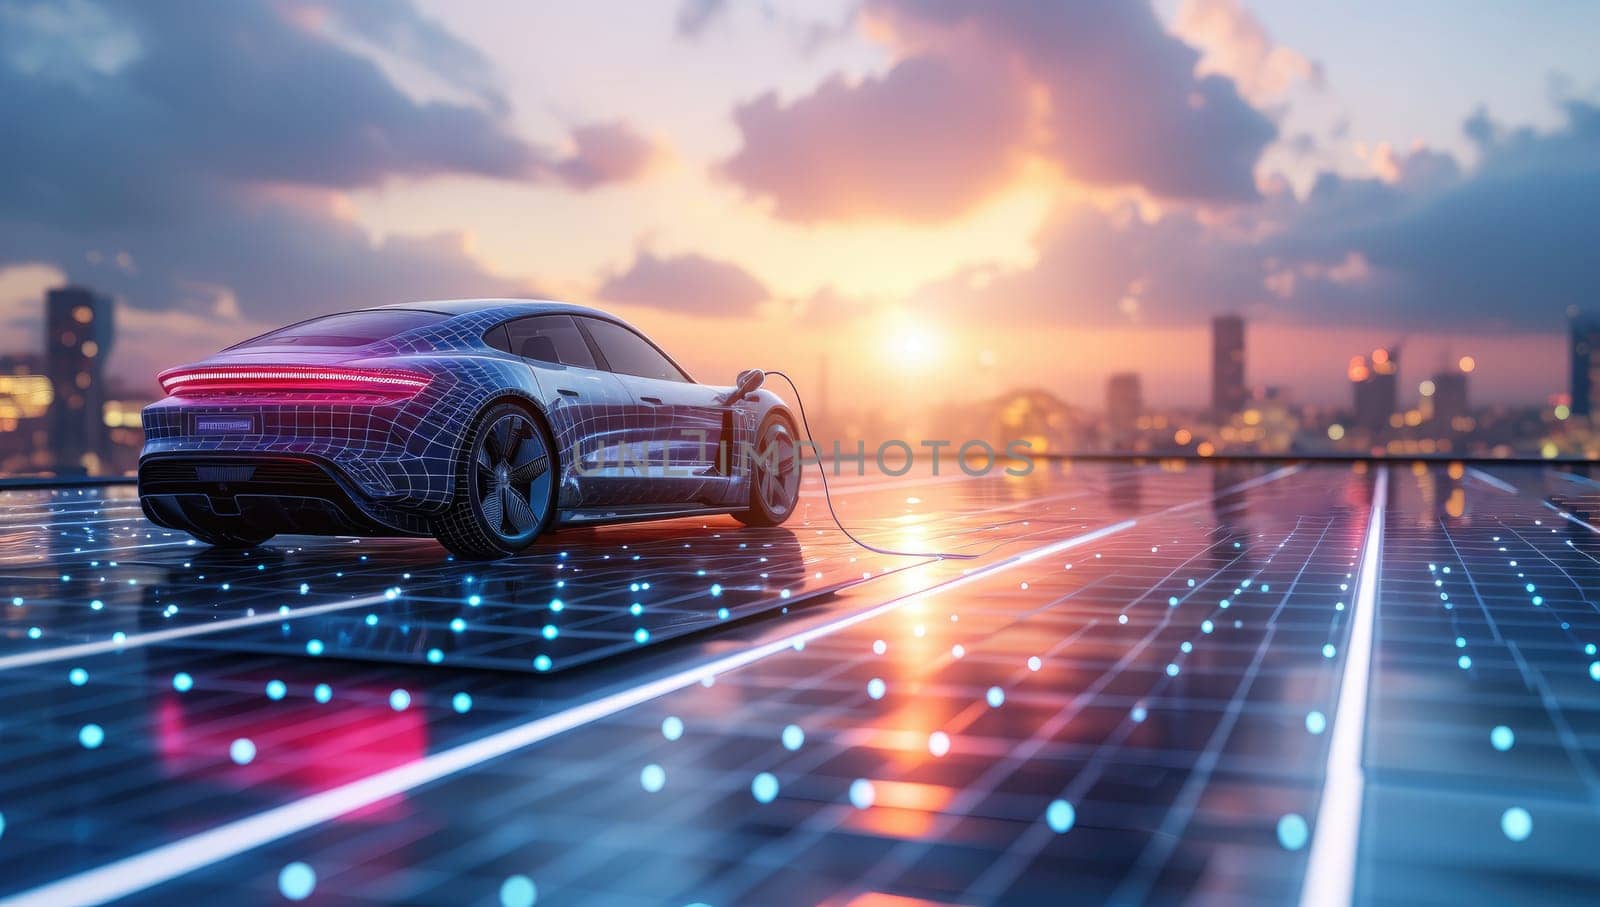 Electric car charging on illuminated solar panels against cityscape at sunset by ailike